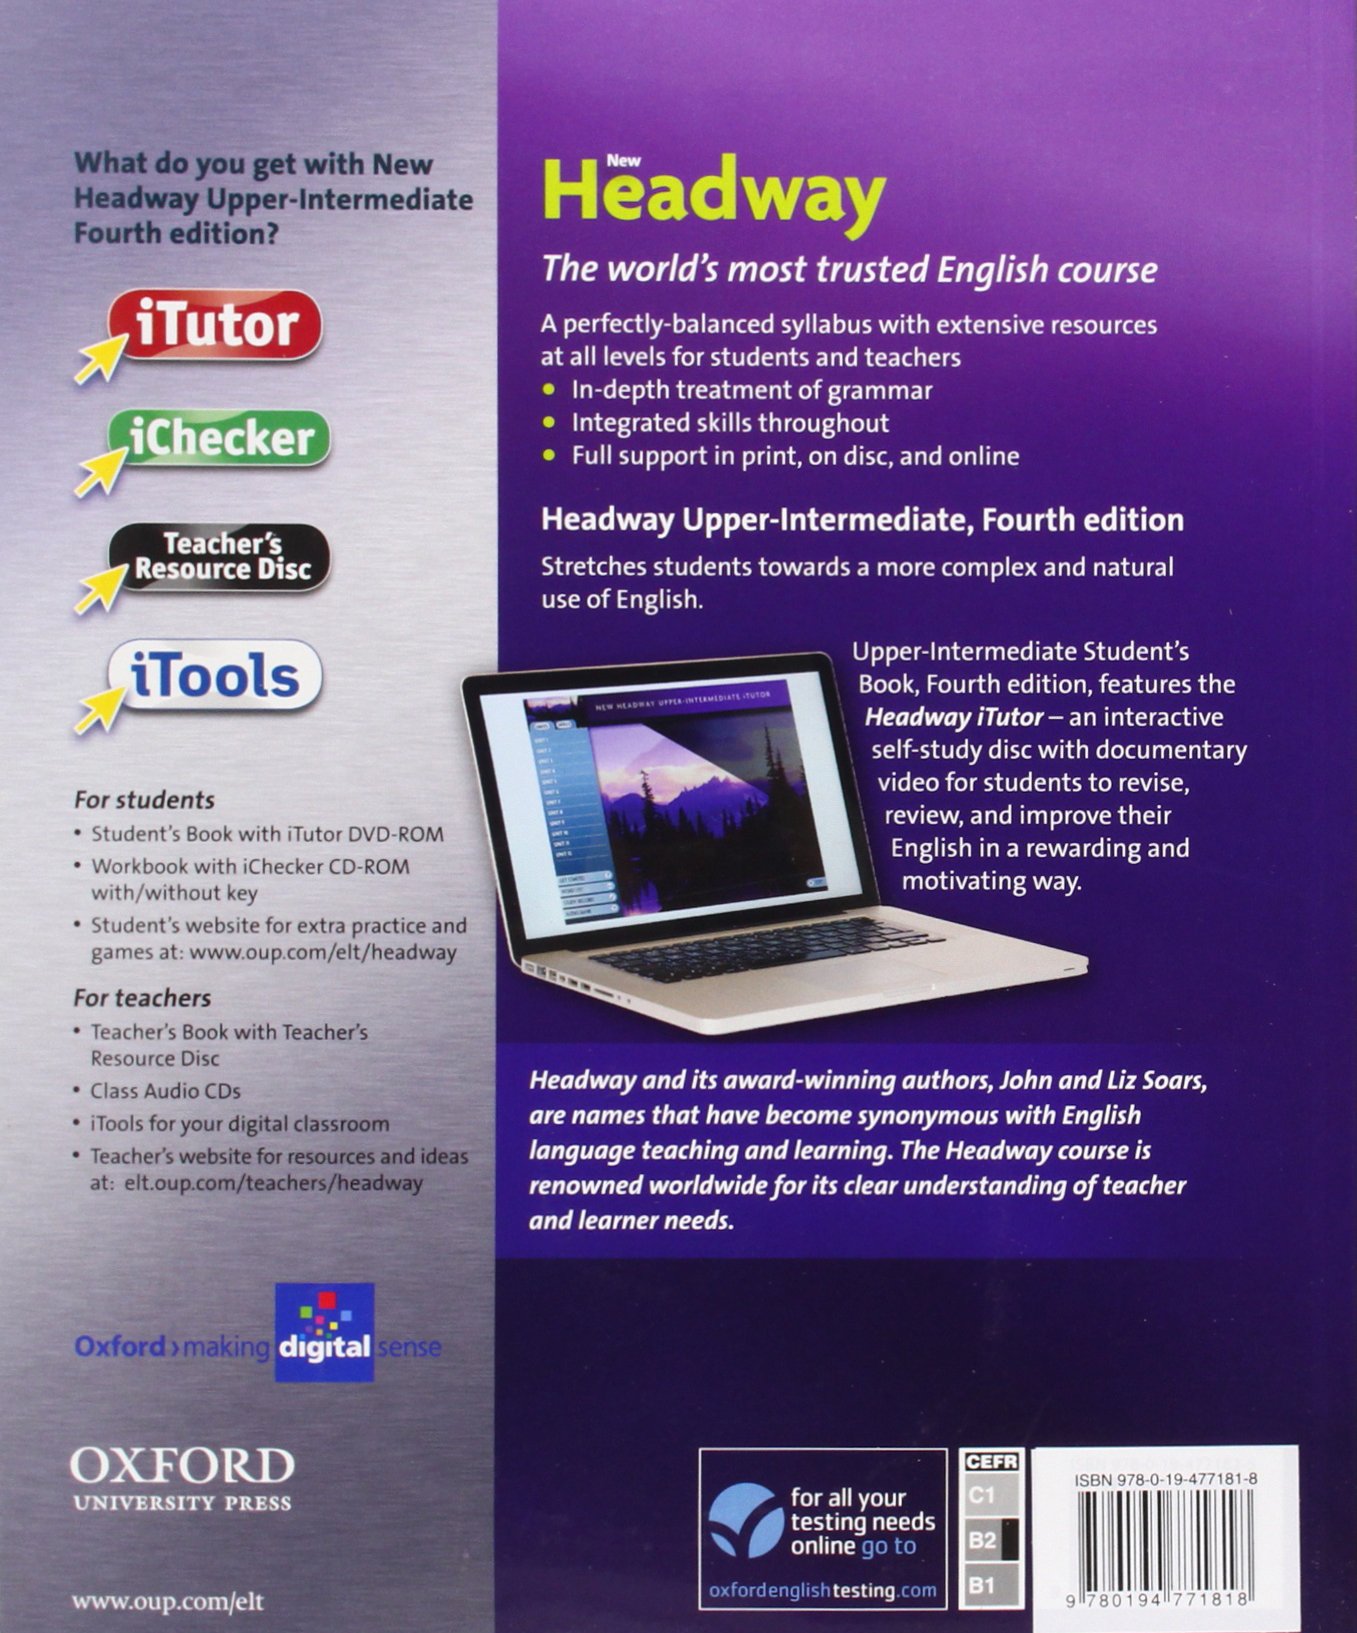 New headway test. Headway 4 Edition Upper-Intermediate. New Headway 4 Edition Upper Intermediate teacher book —. Headway Upper Intermediate 4th Edition. New Headway Upper Intermediate 4th Edition teacher's book.